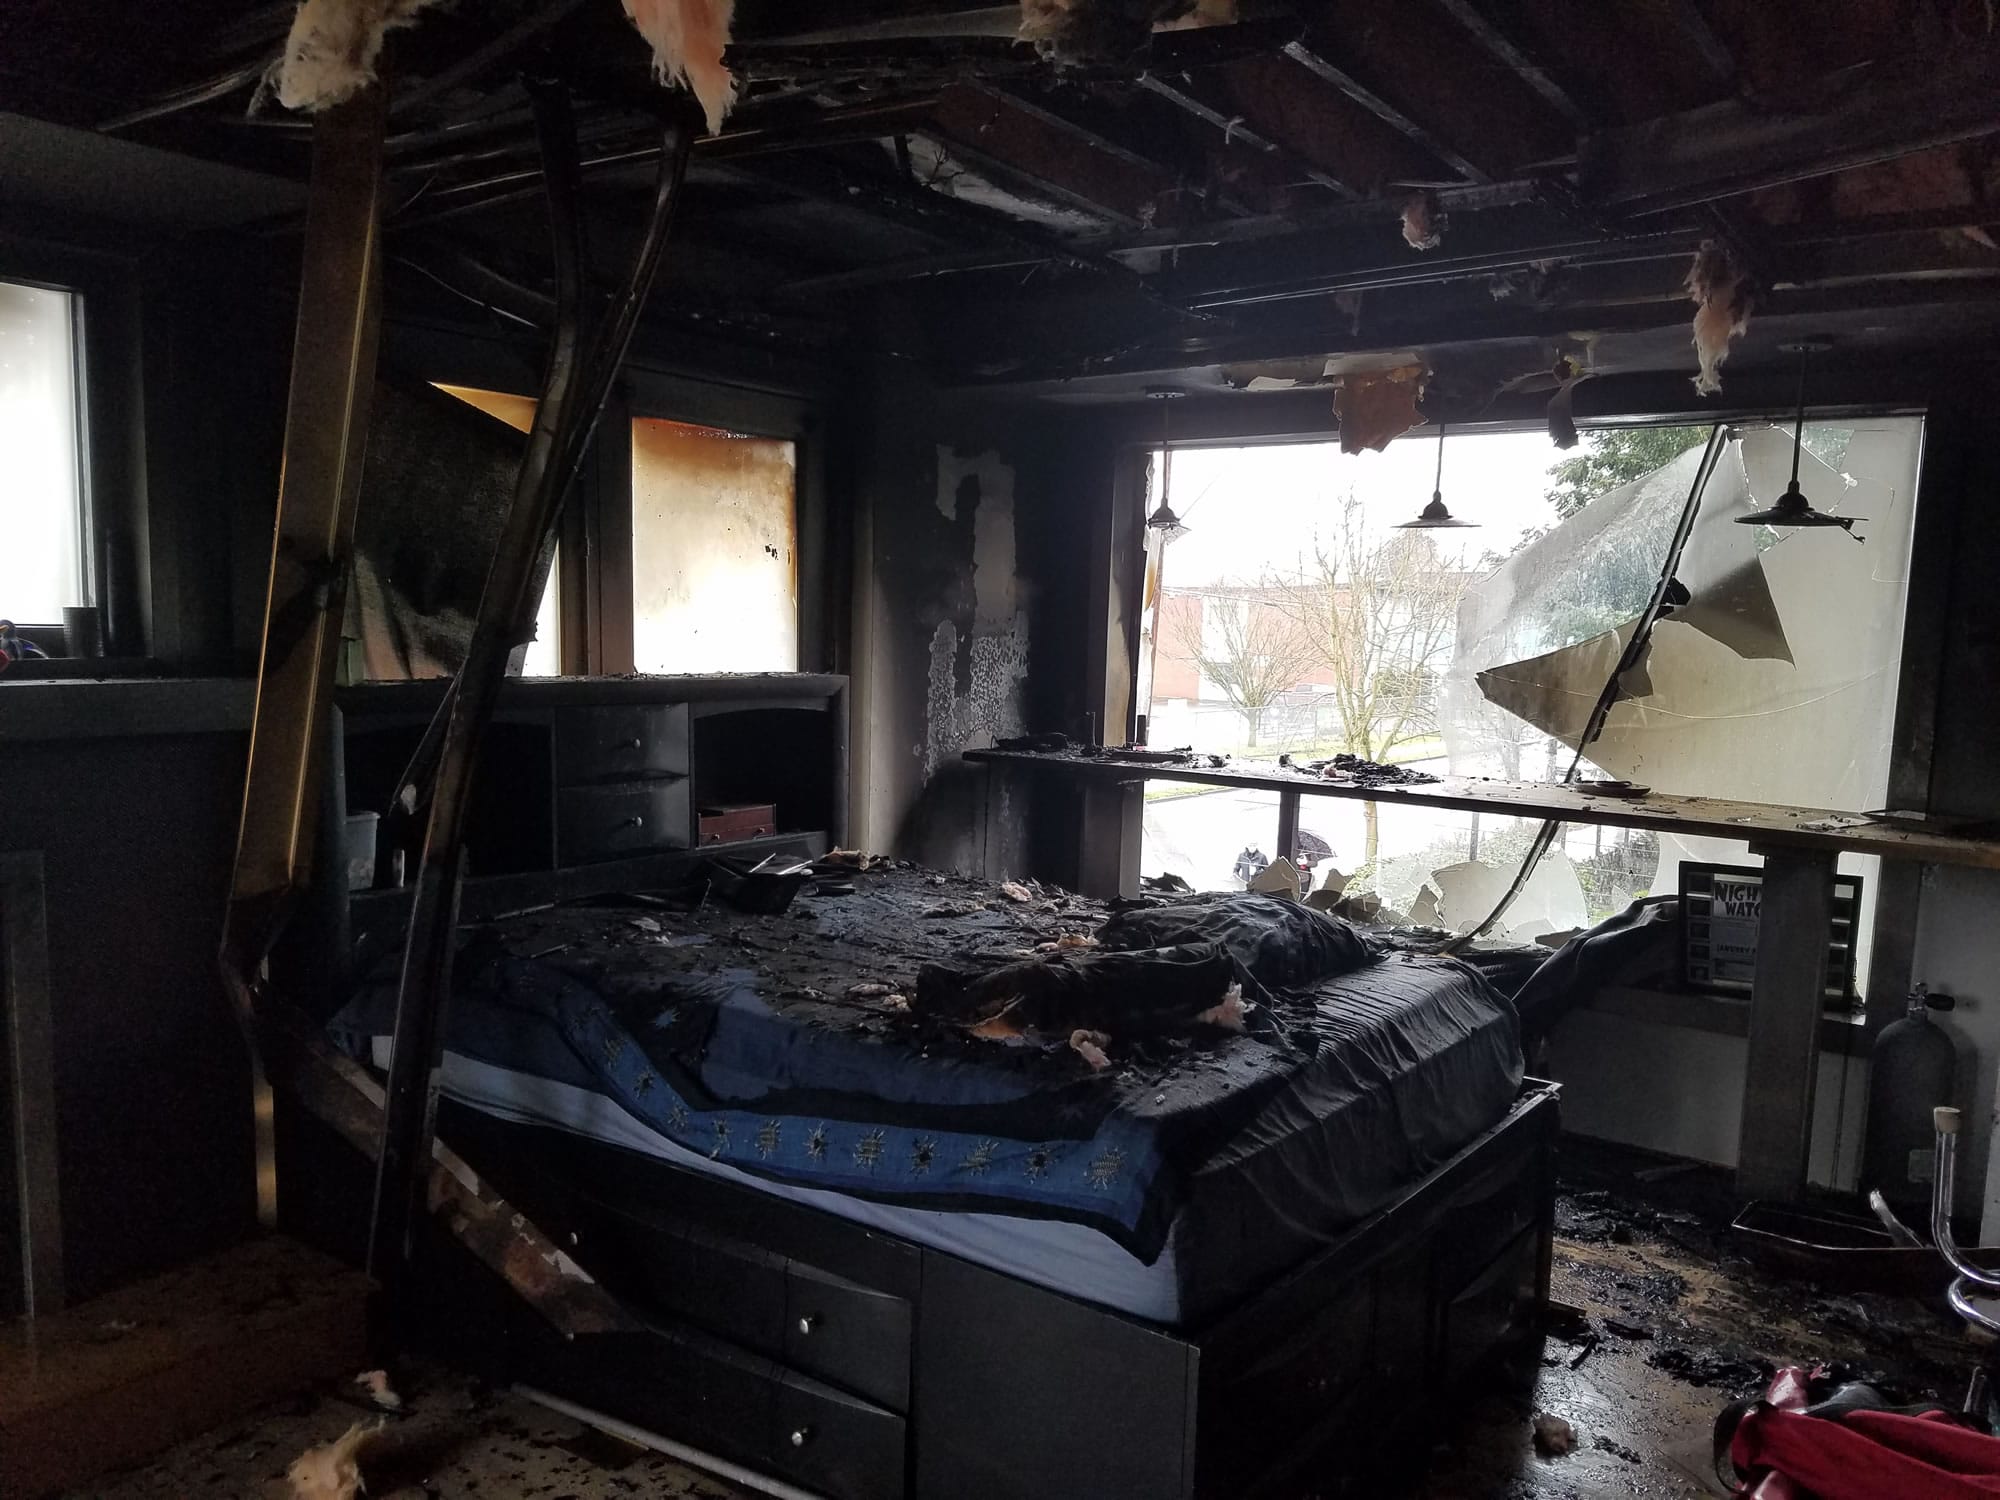 A charging tablet was likely the cause of a blaze at an apartment above Igloo Restaurant, fire investigators reported.